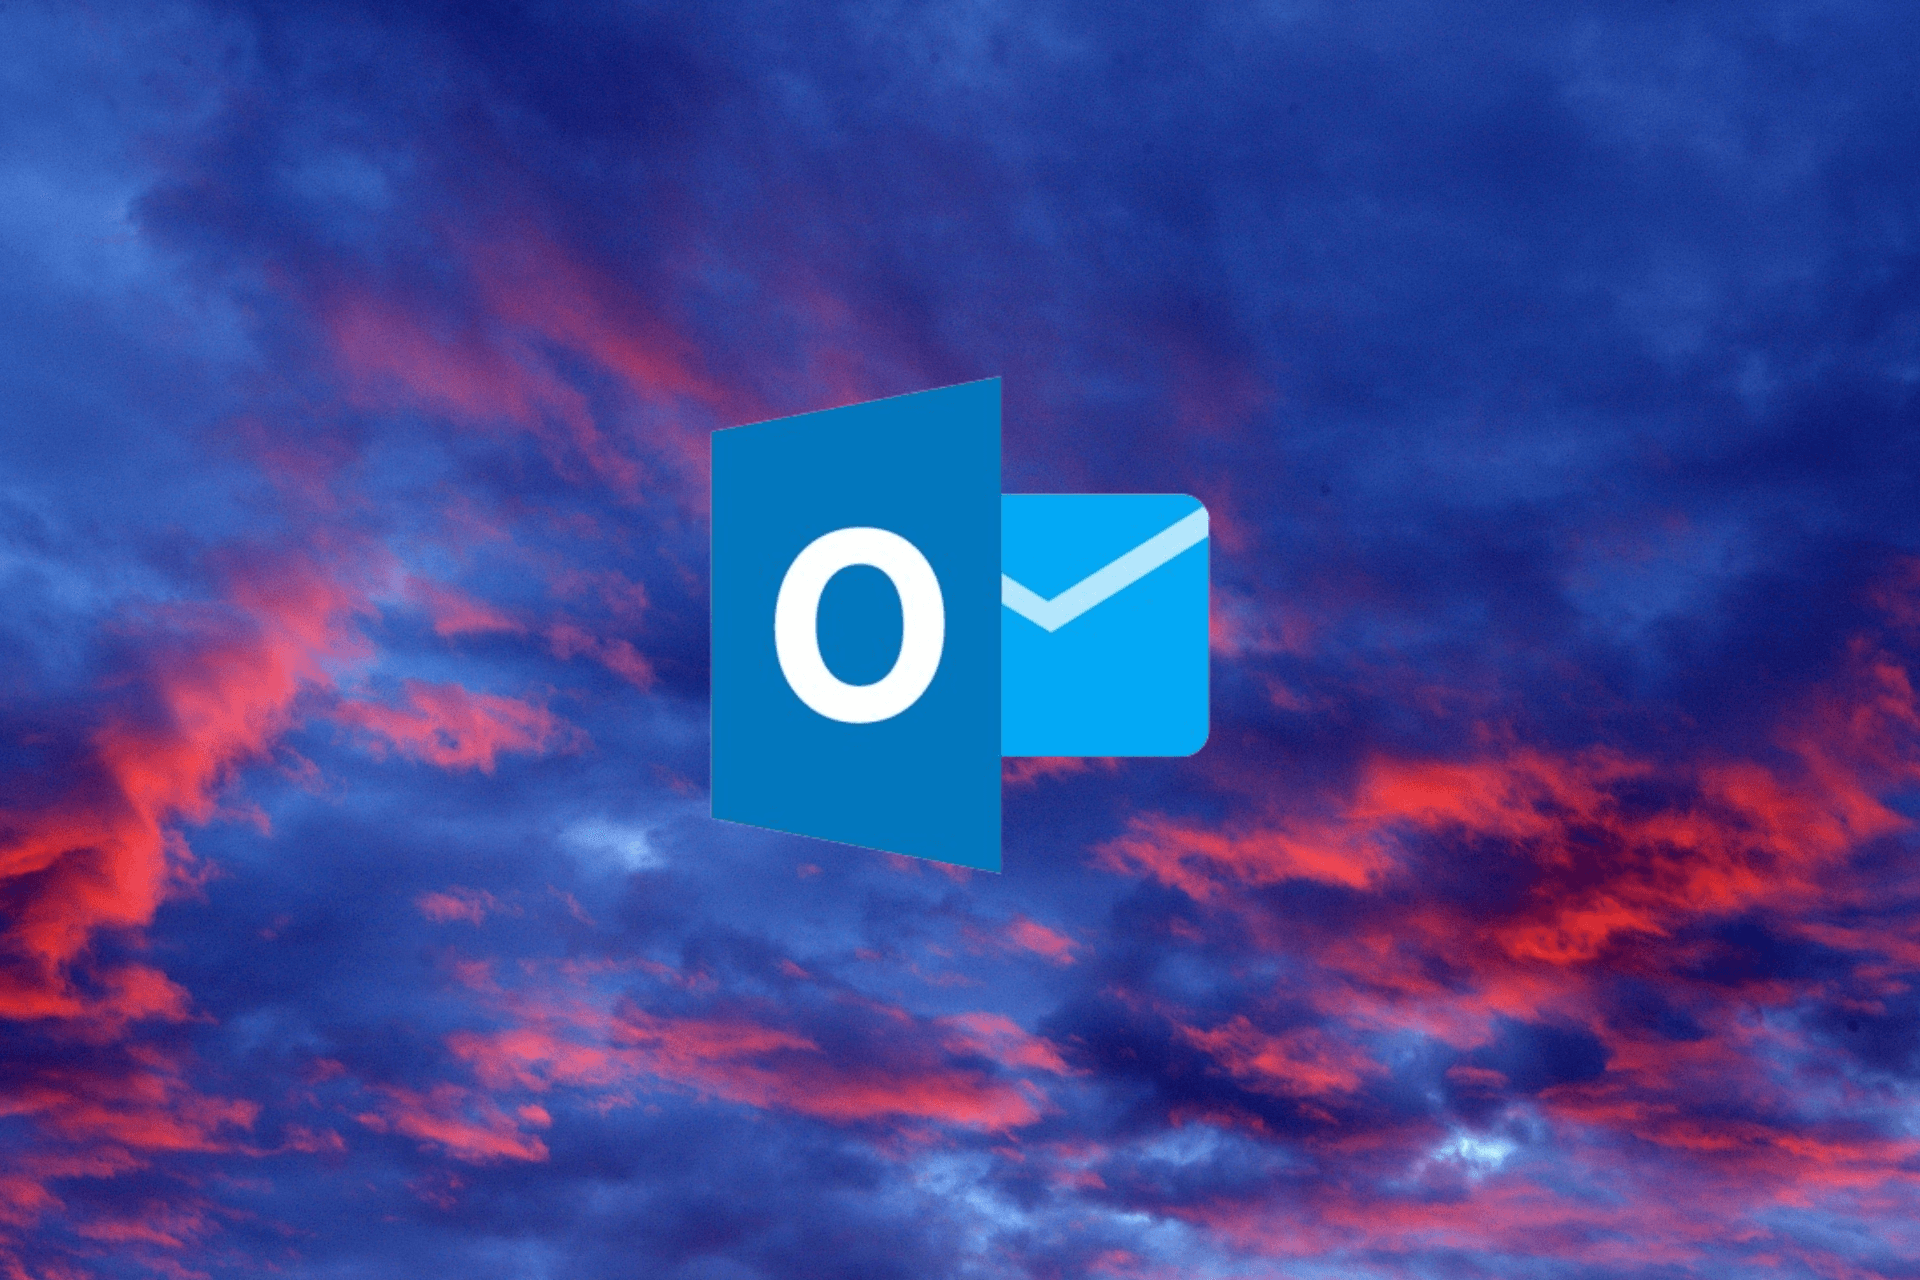 Microsoft comes with a workaround for Gmail, blocking Outlook email as spam